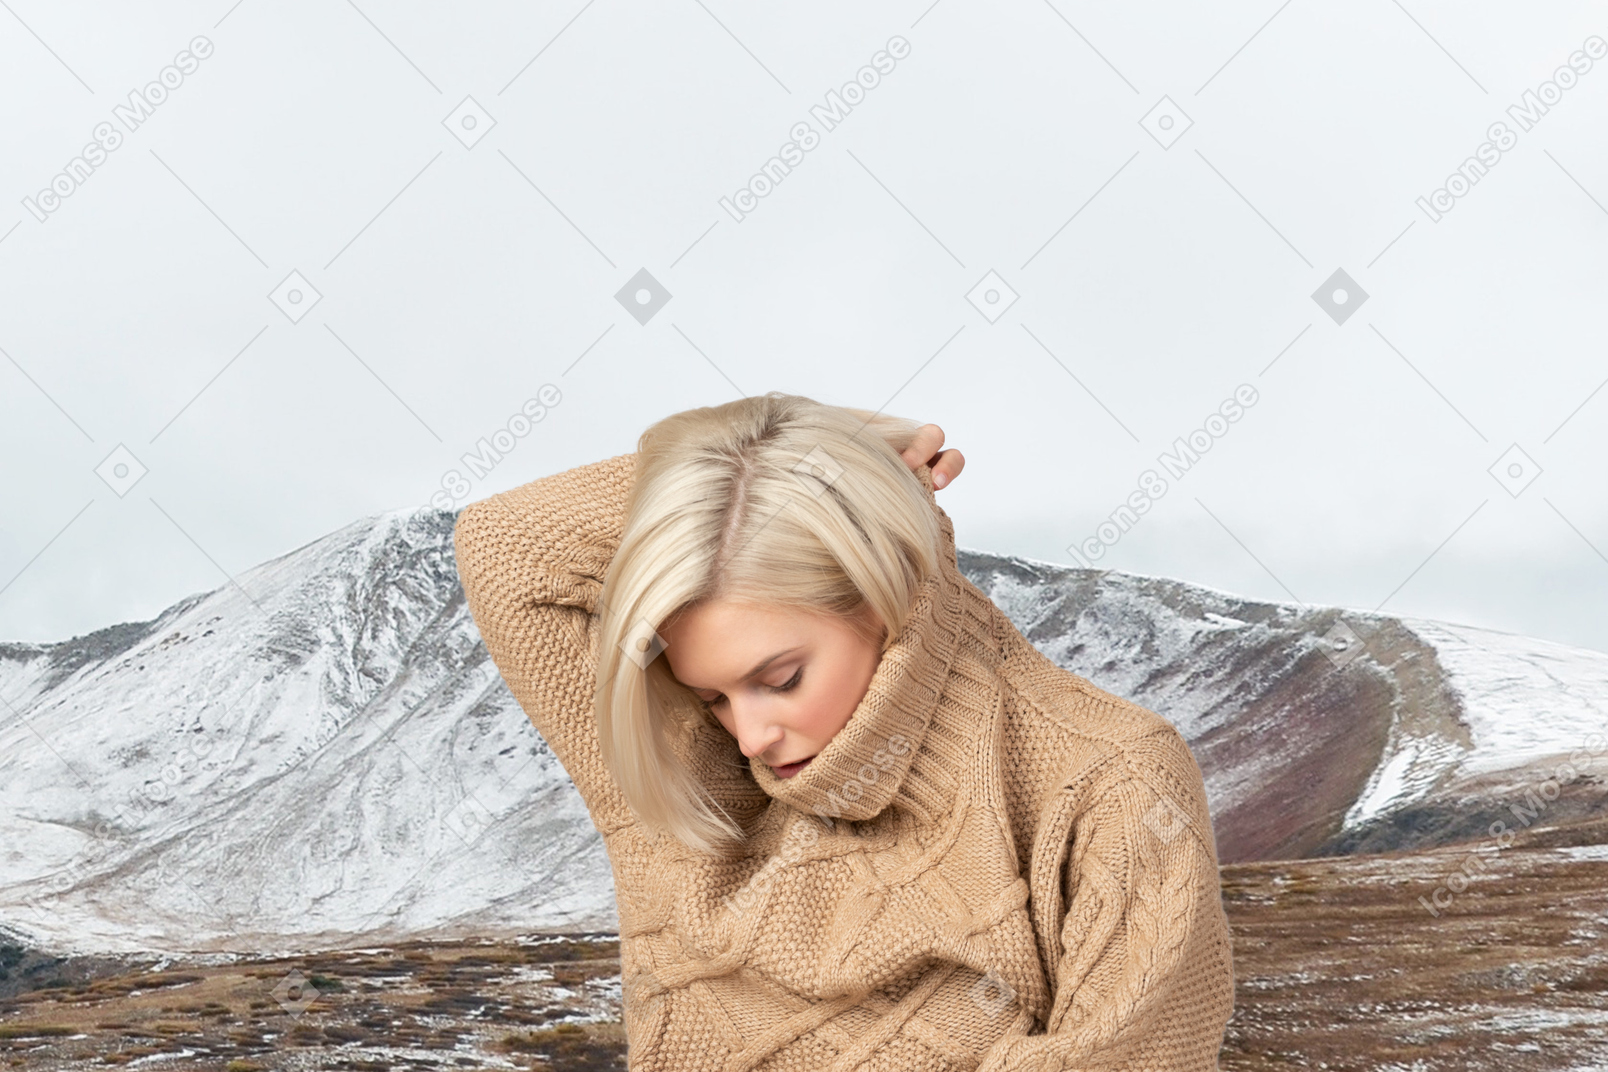 A woman with blond hair wearing a tan sweater